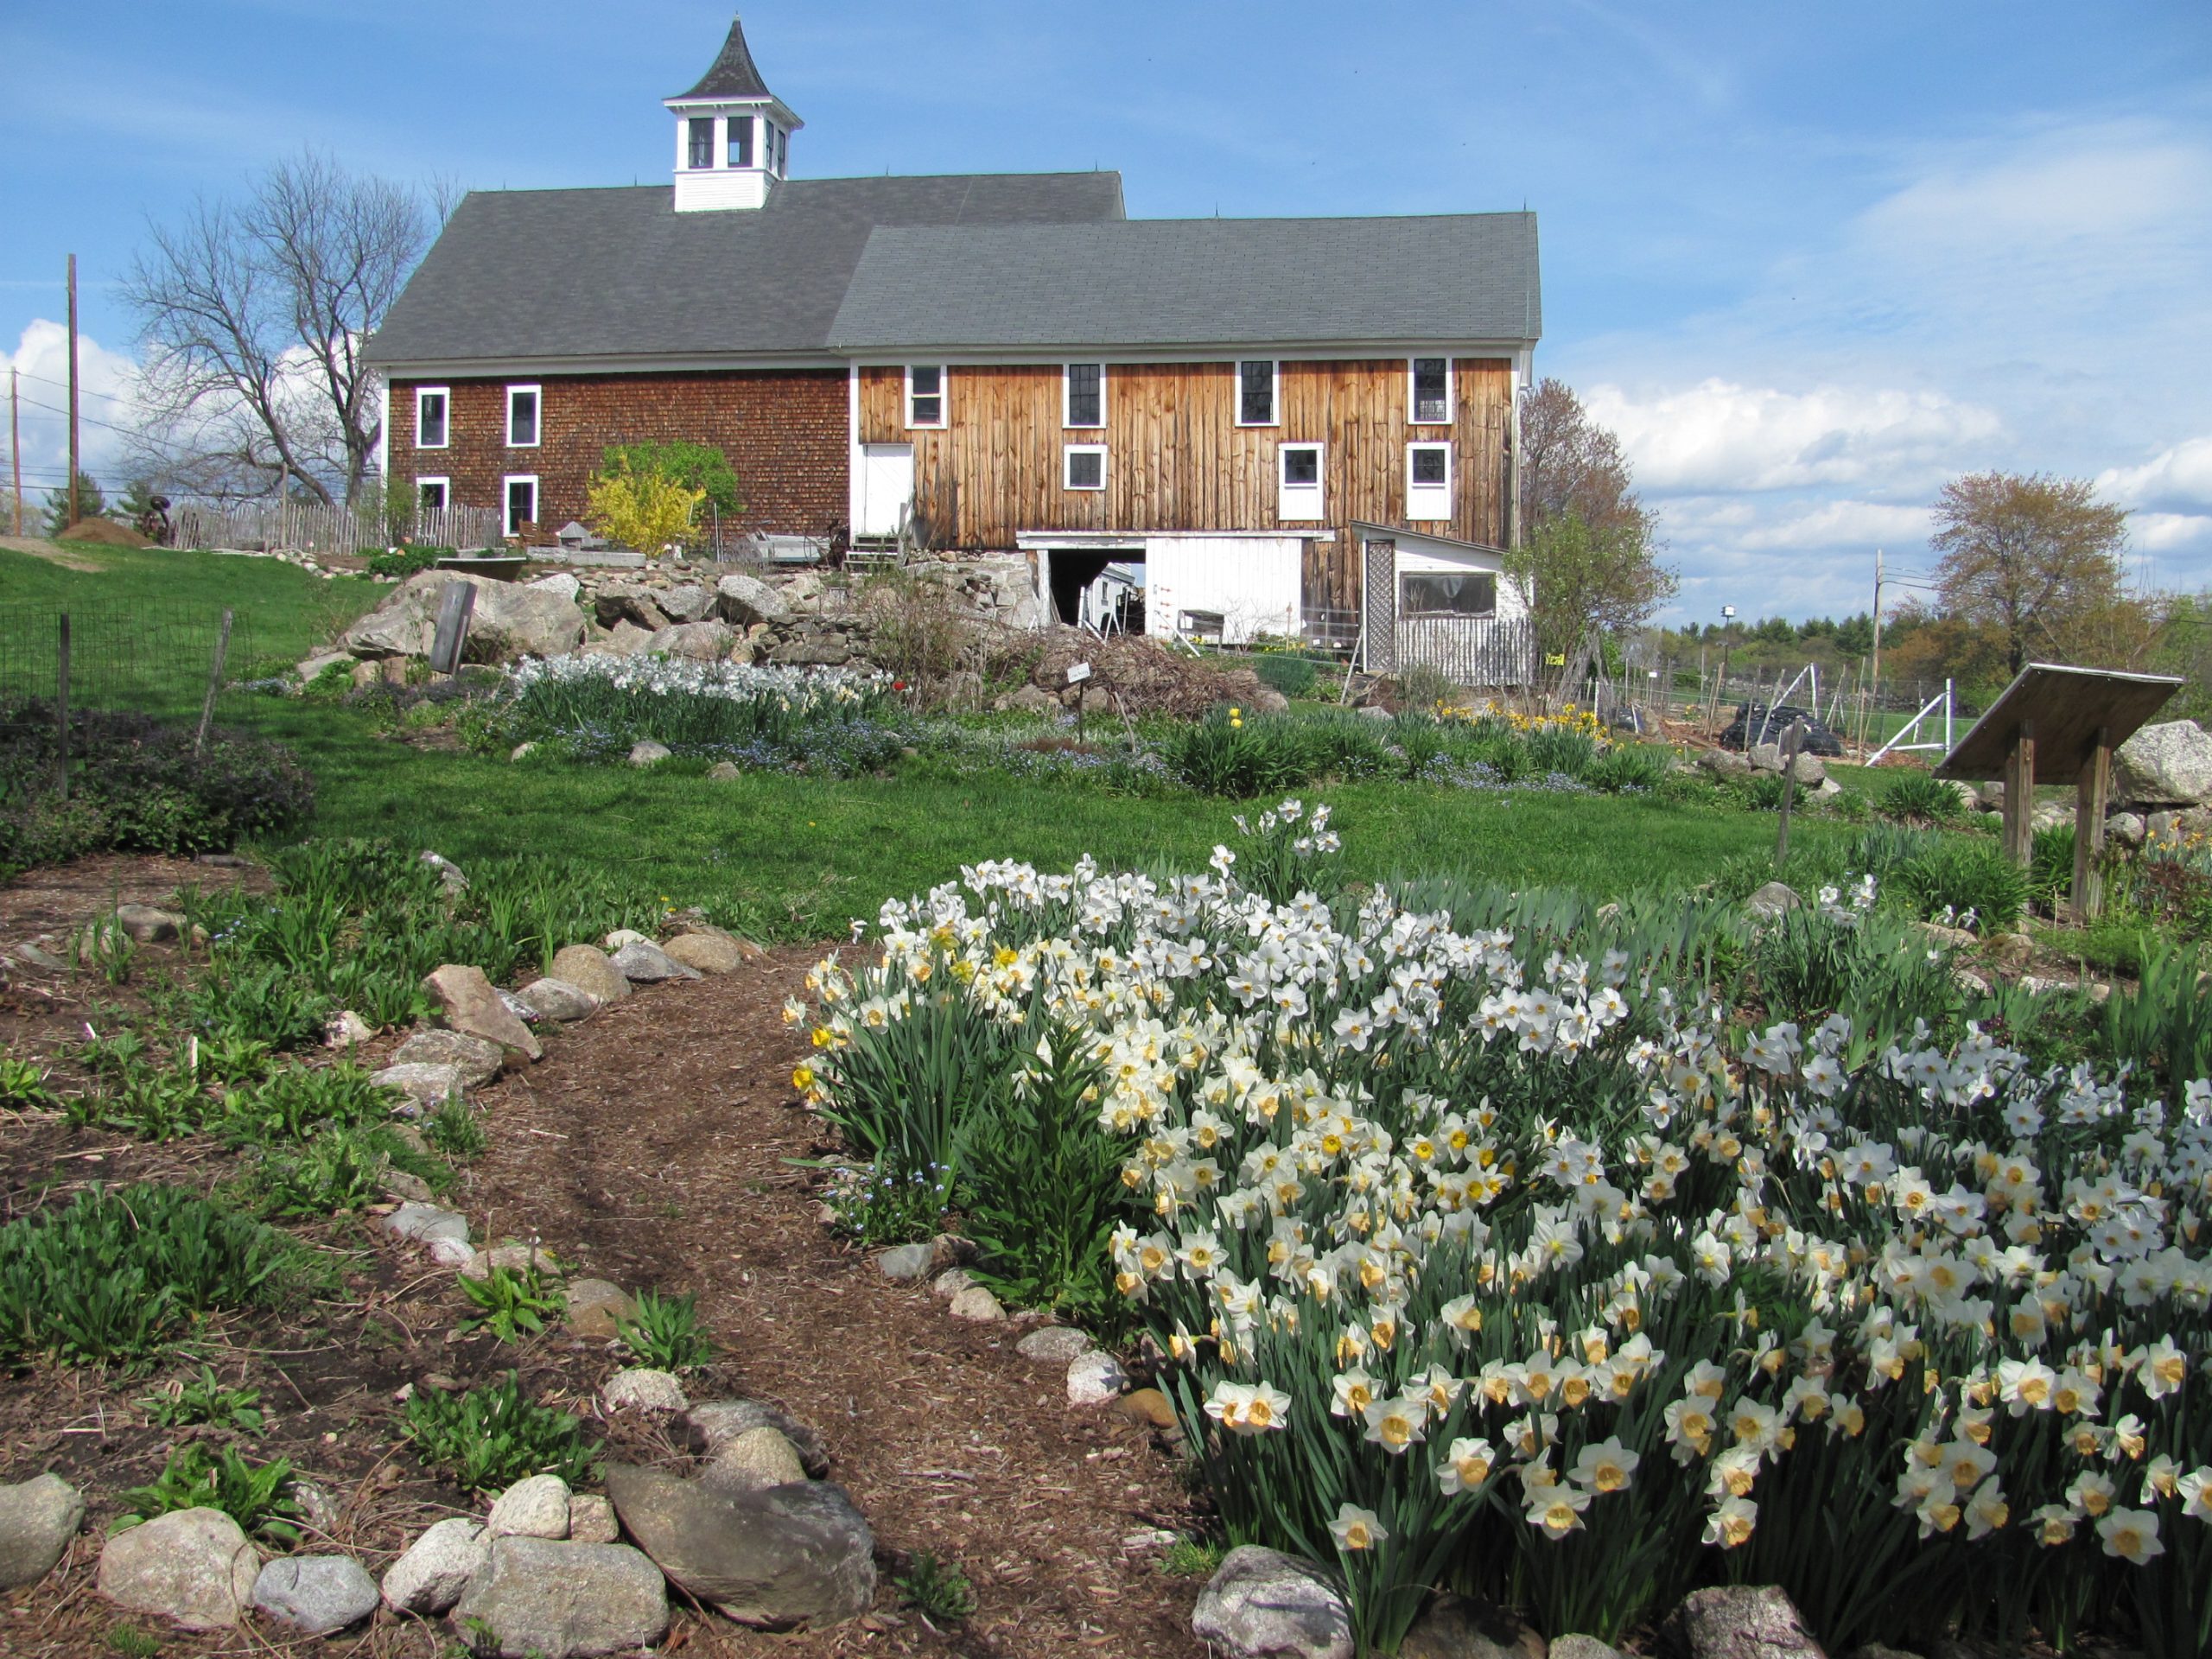 Prescott Farm In The Spring! (user submitted)